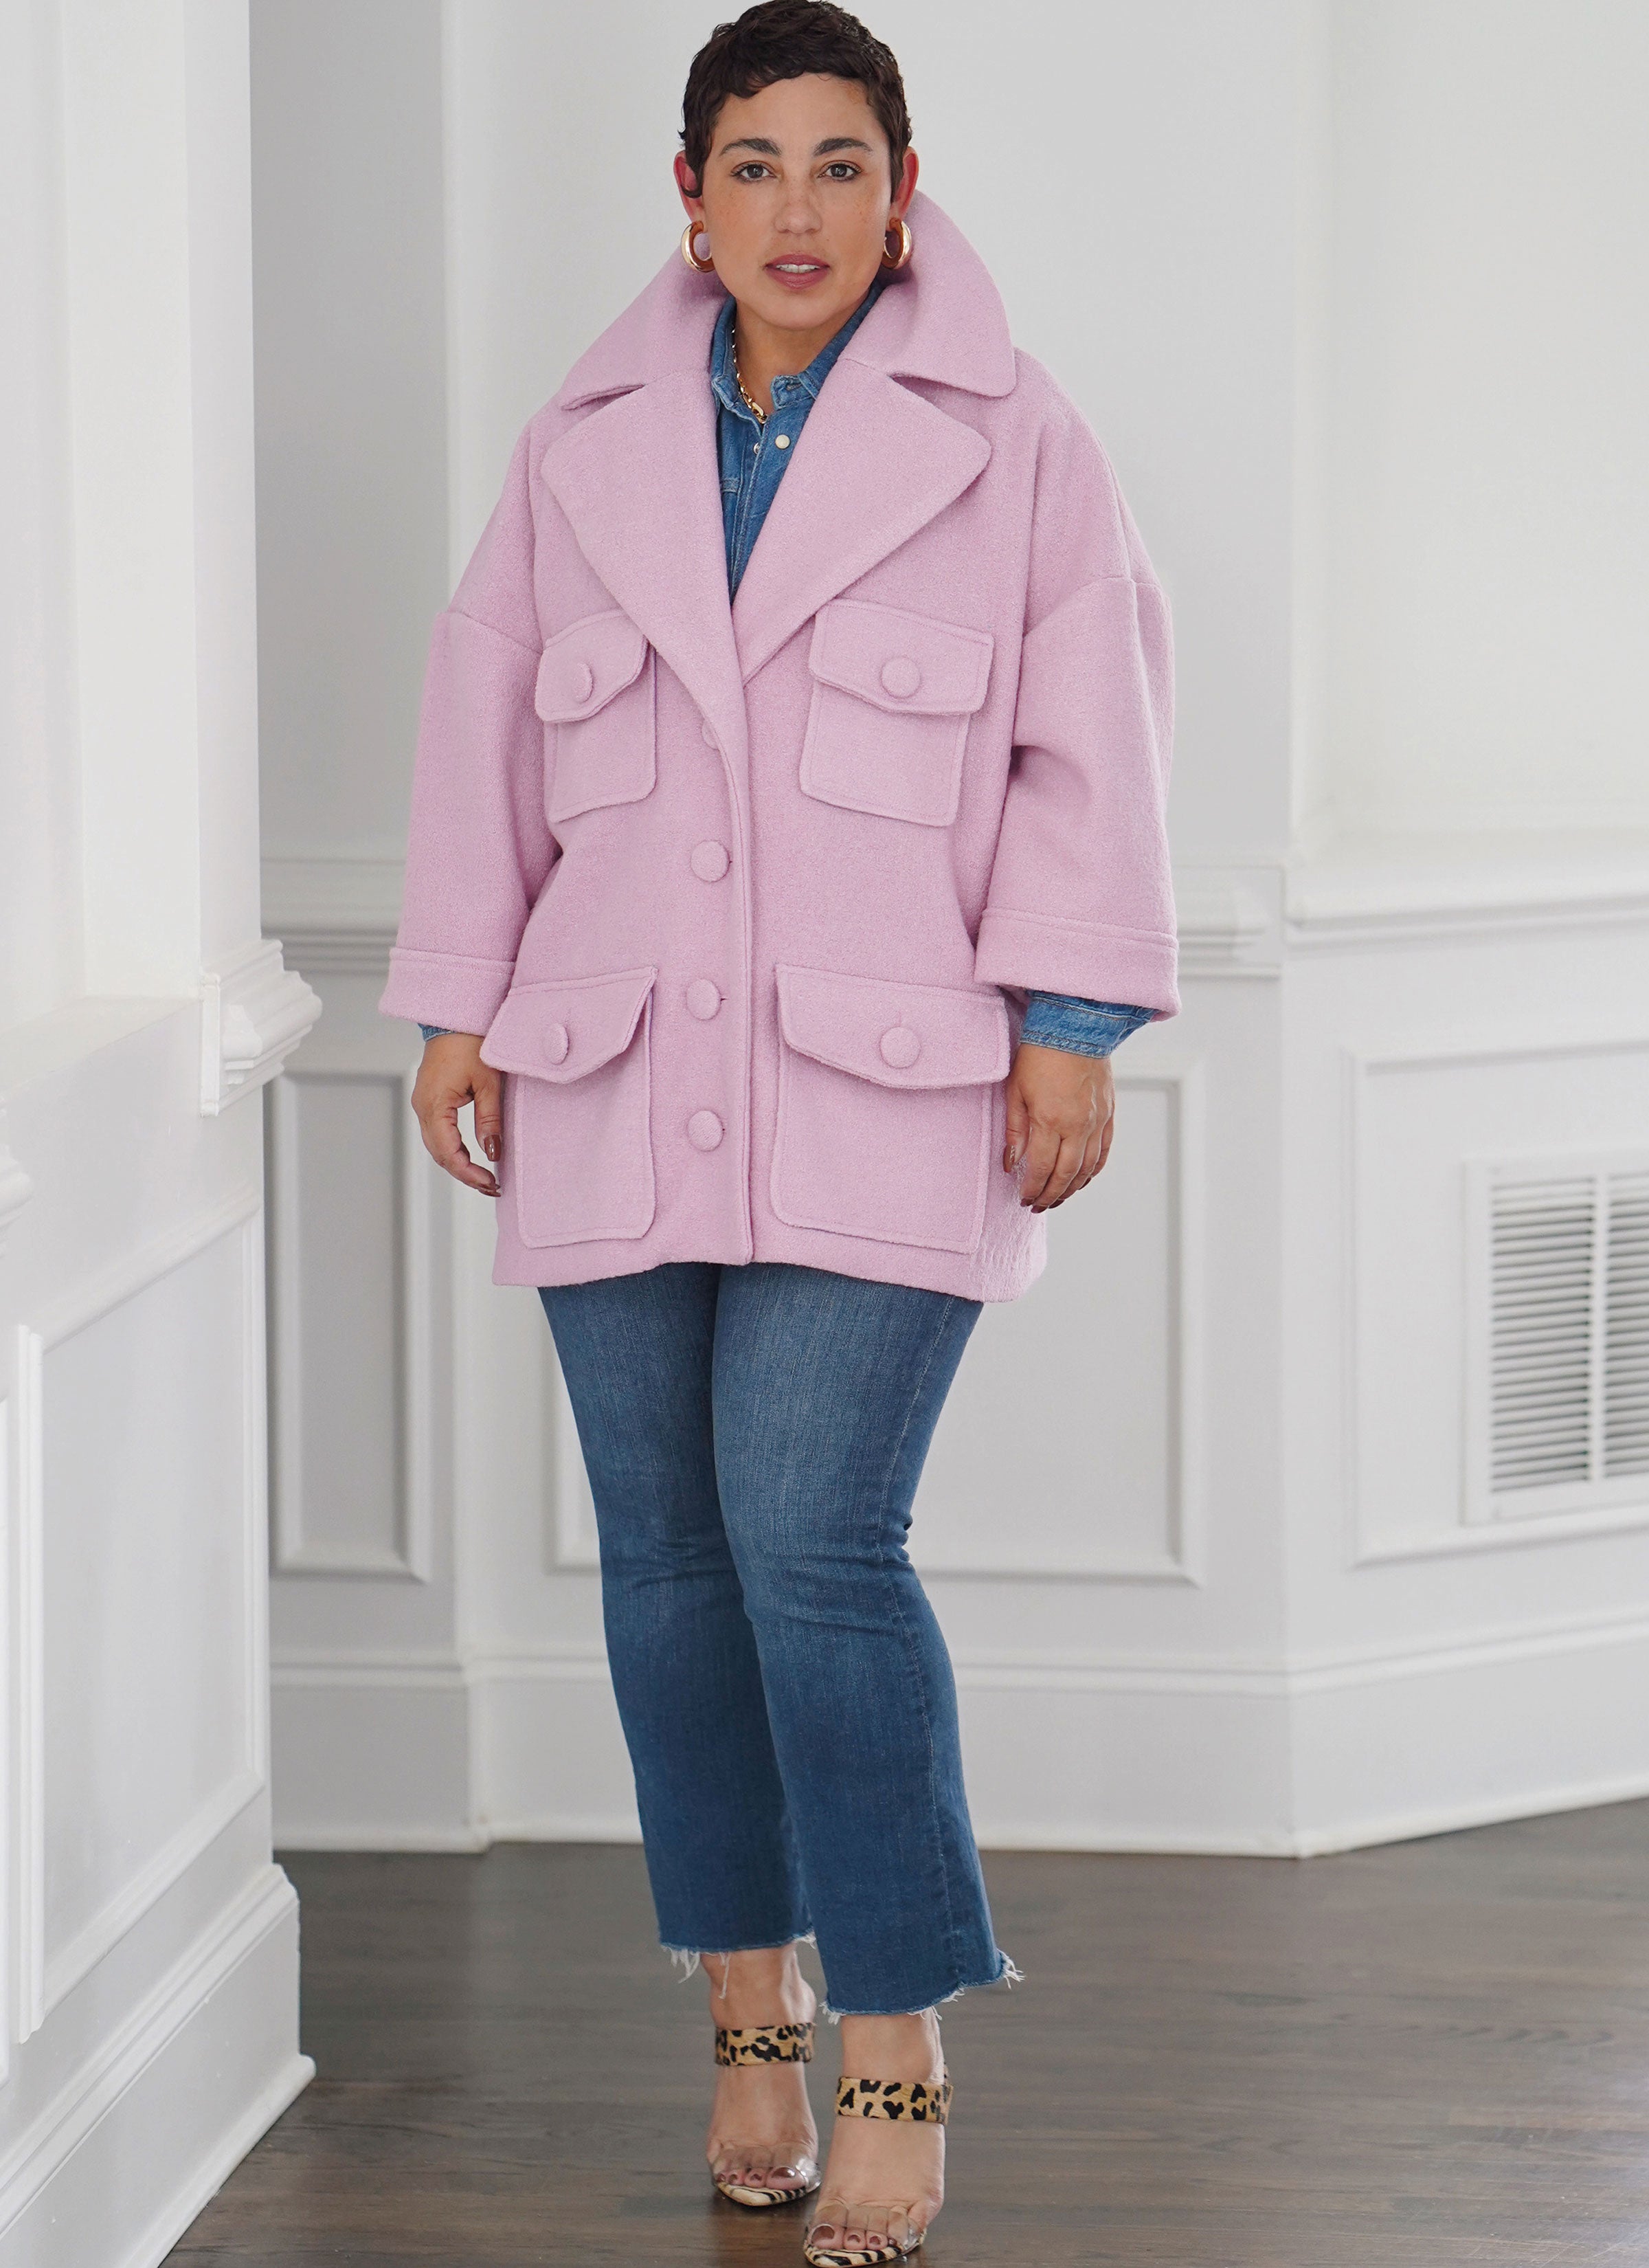 Simplicity sewing pattern 9824 Misses' Coat in Two Lengths by Mimi G Style from Jaycotts Sewing Supplies